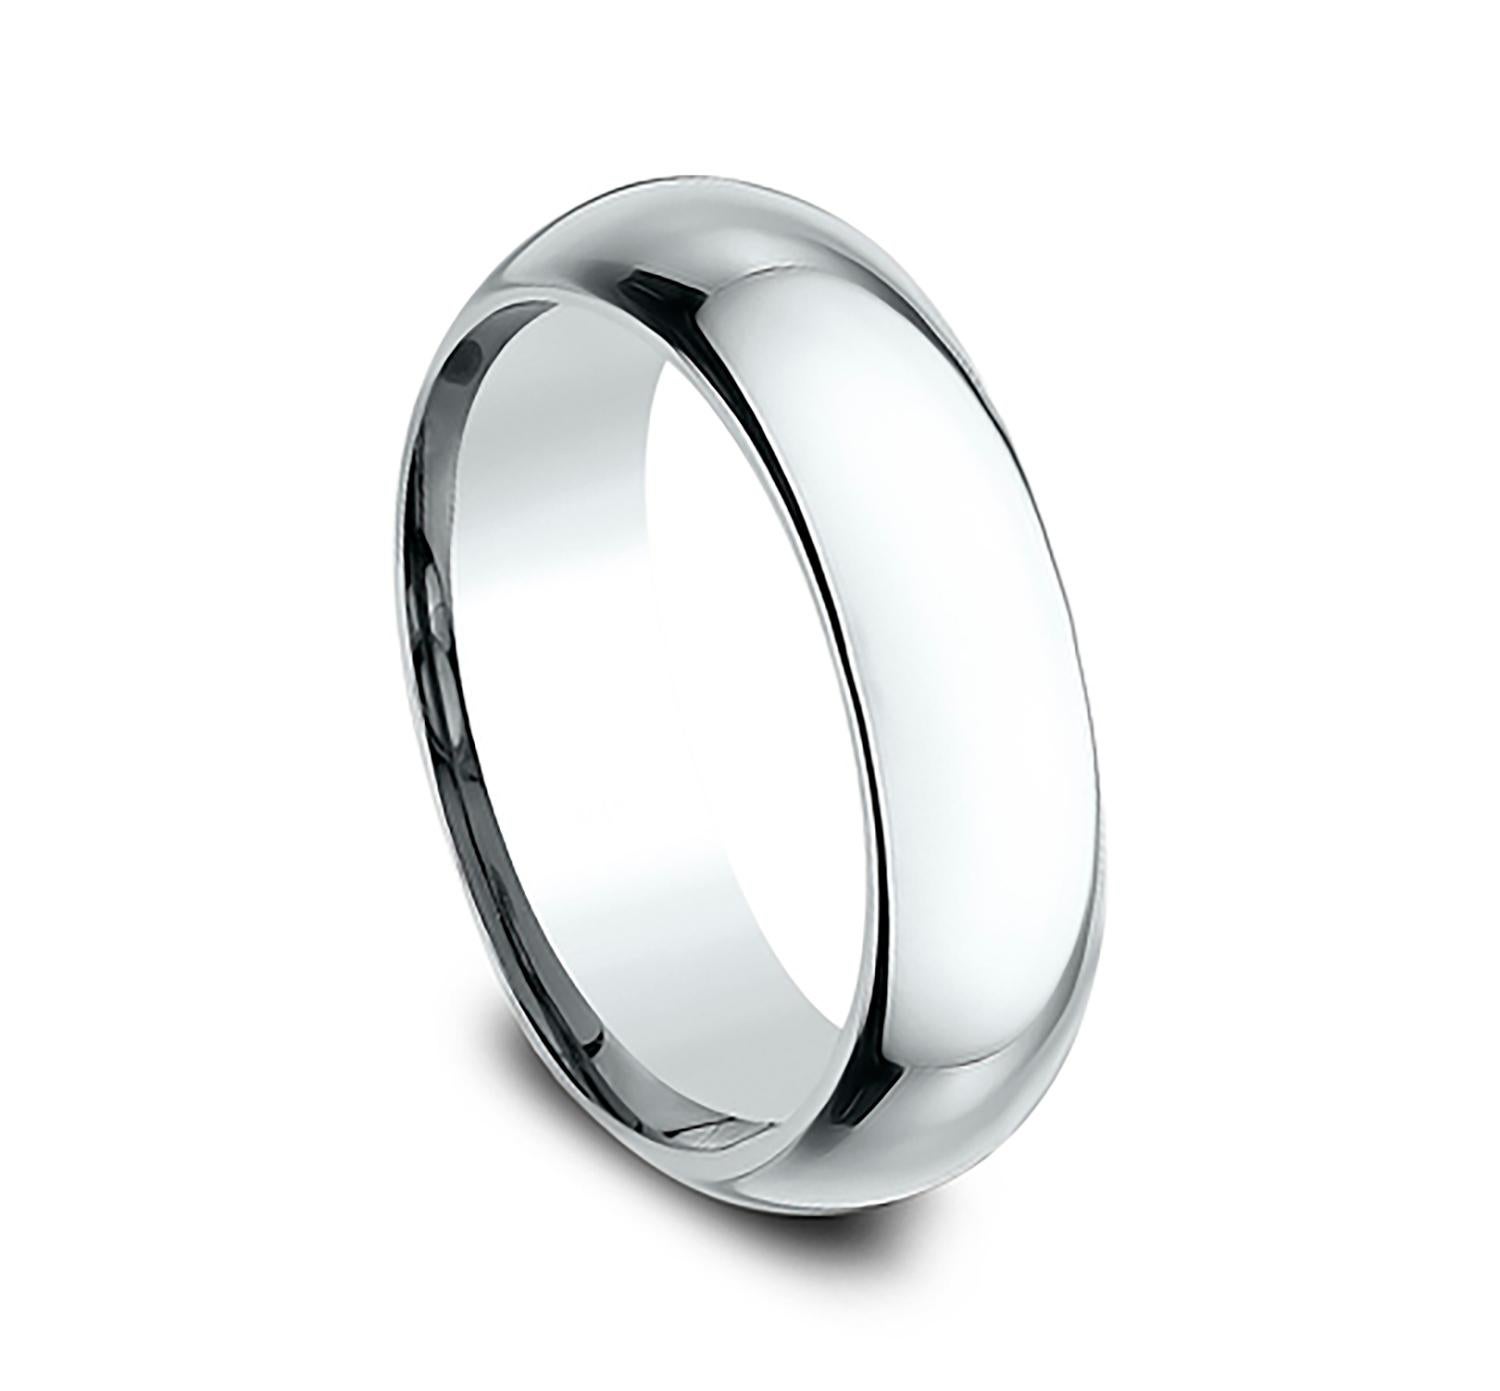 Benchmark wedding band in 14K white gold polished finish. Width 6mm, high dome comfort fit. Custom engraving and finishing available. Size 8 US and resizable upon request. Available in 1/4, 1/2, and 3/4 sizes, for more information please message us